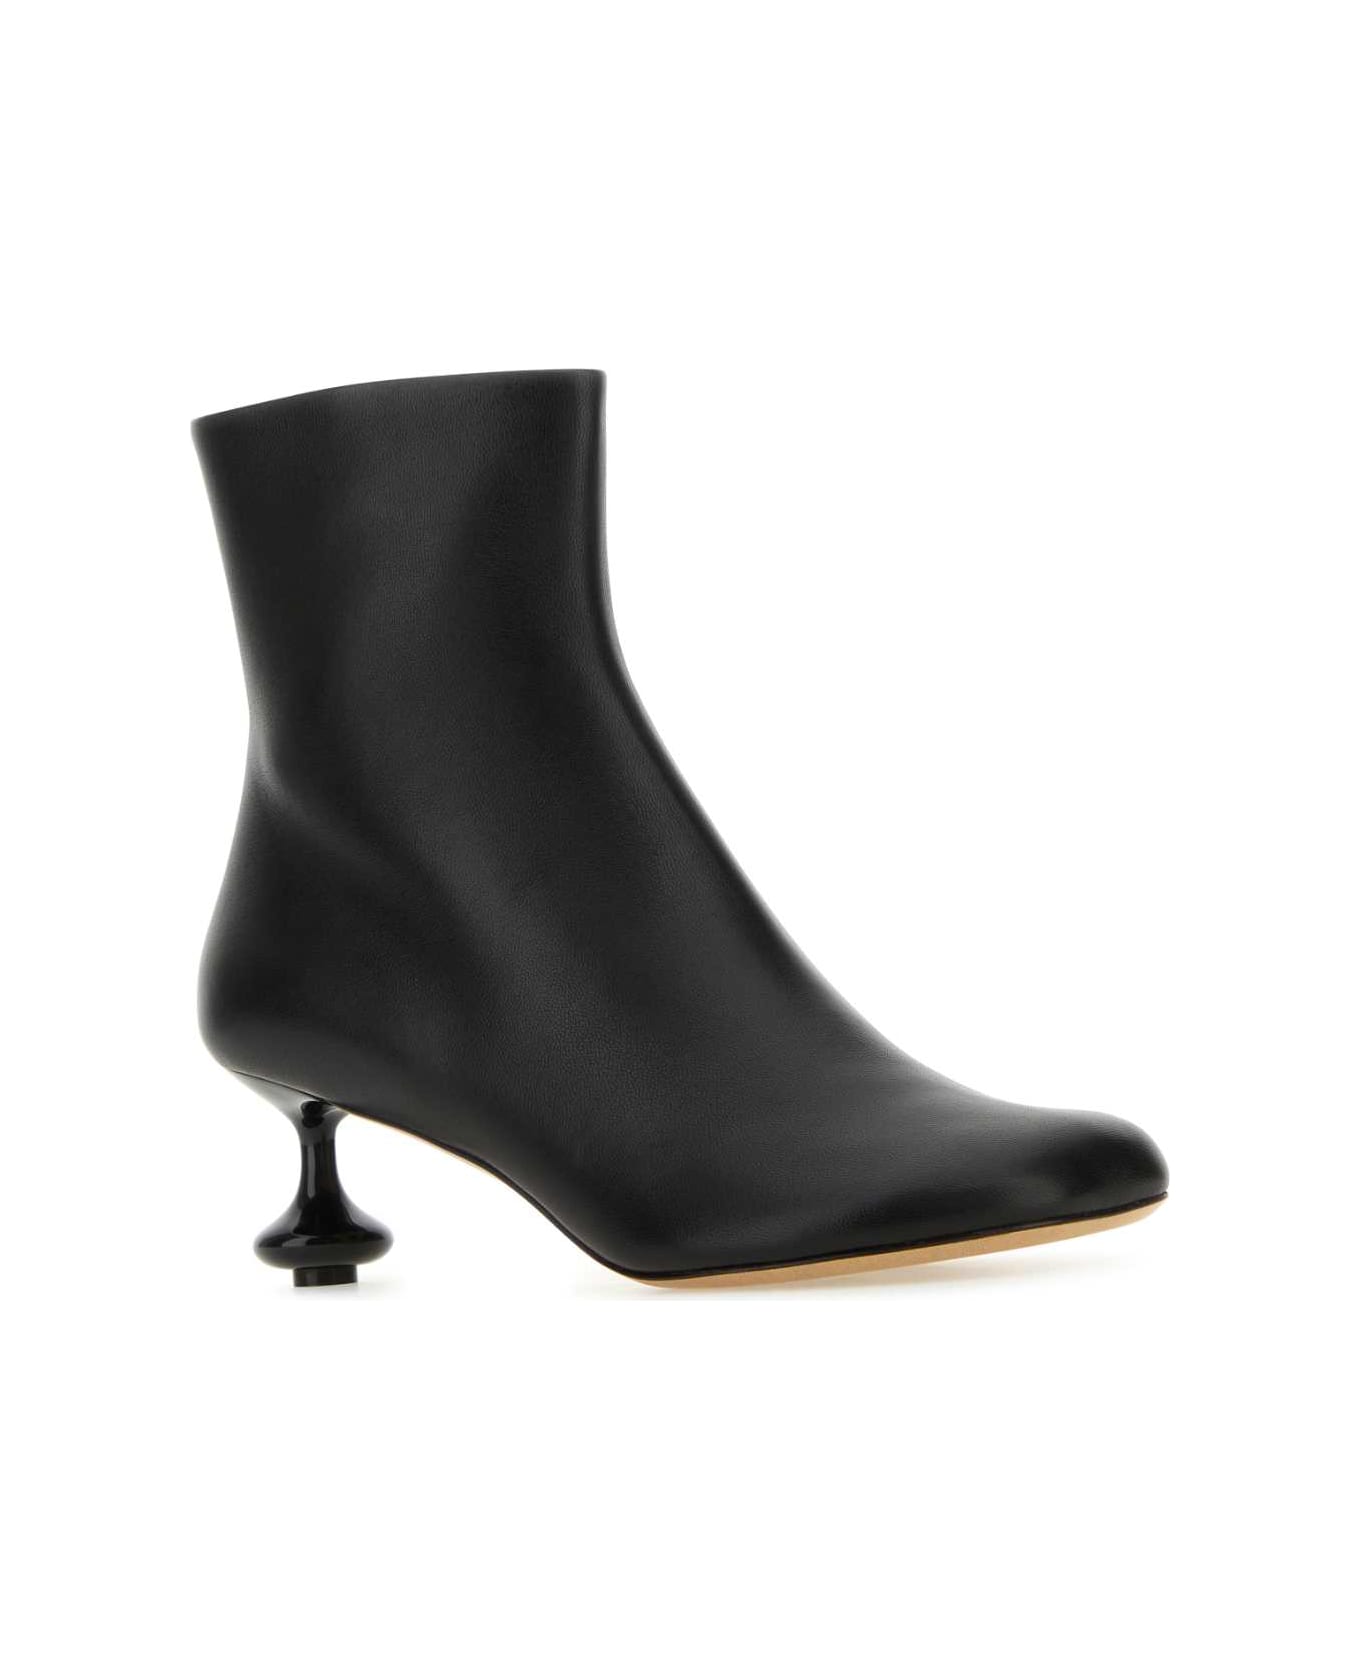 Loewe Black Nappa Leather Toy Ankle Boots - BLACK